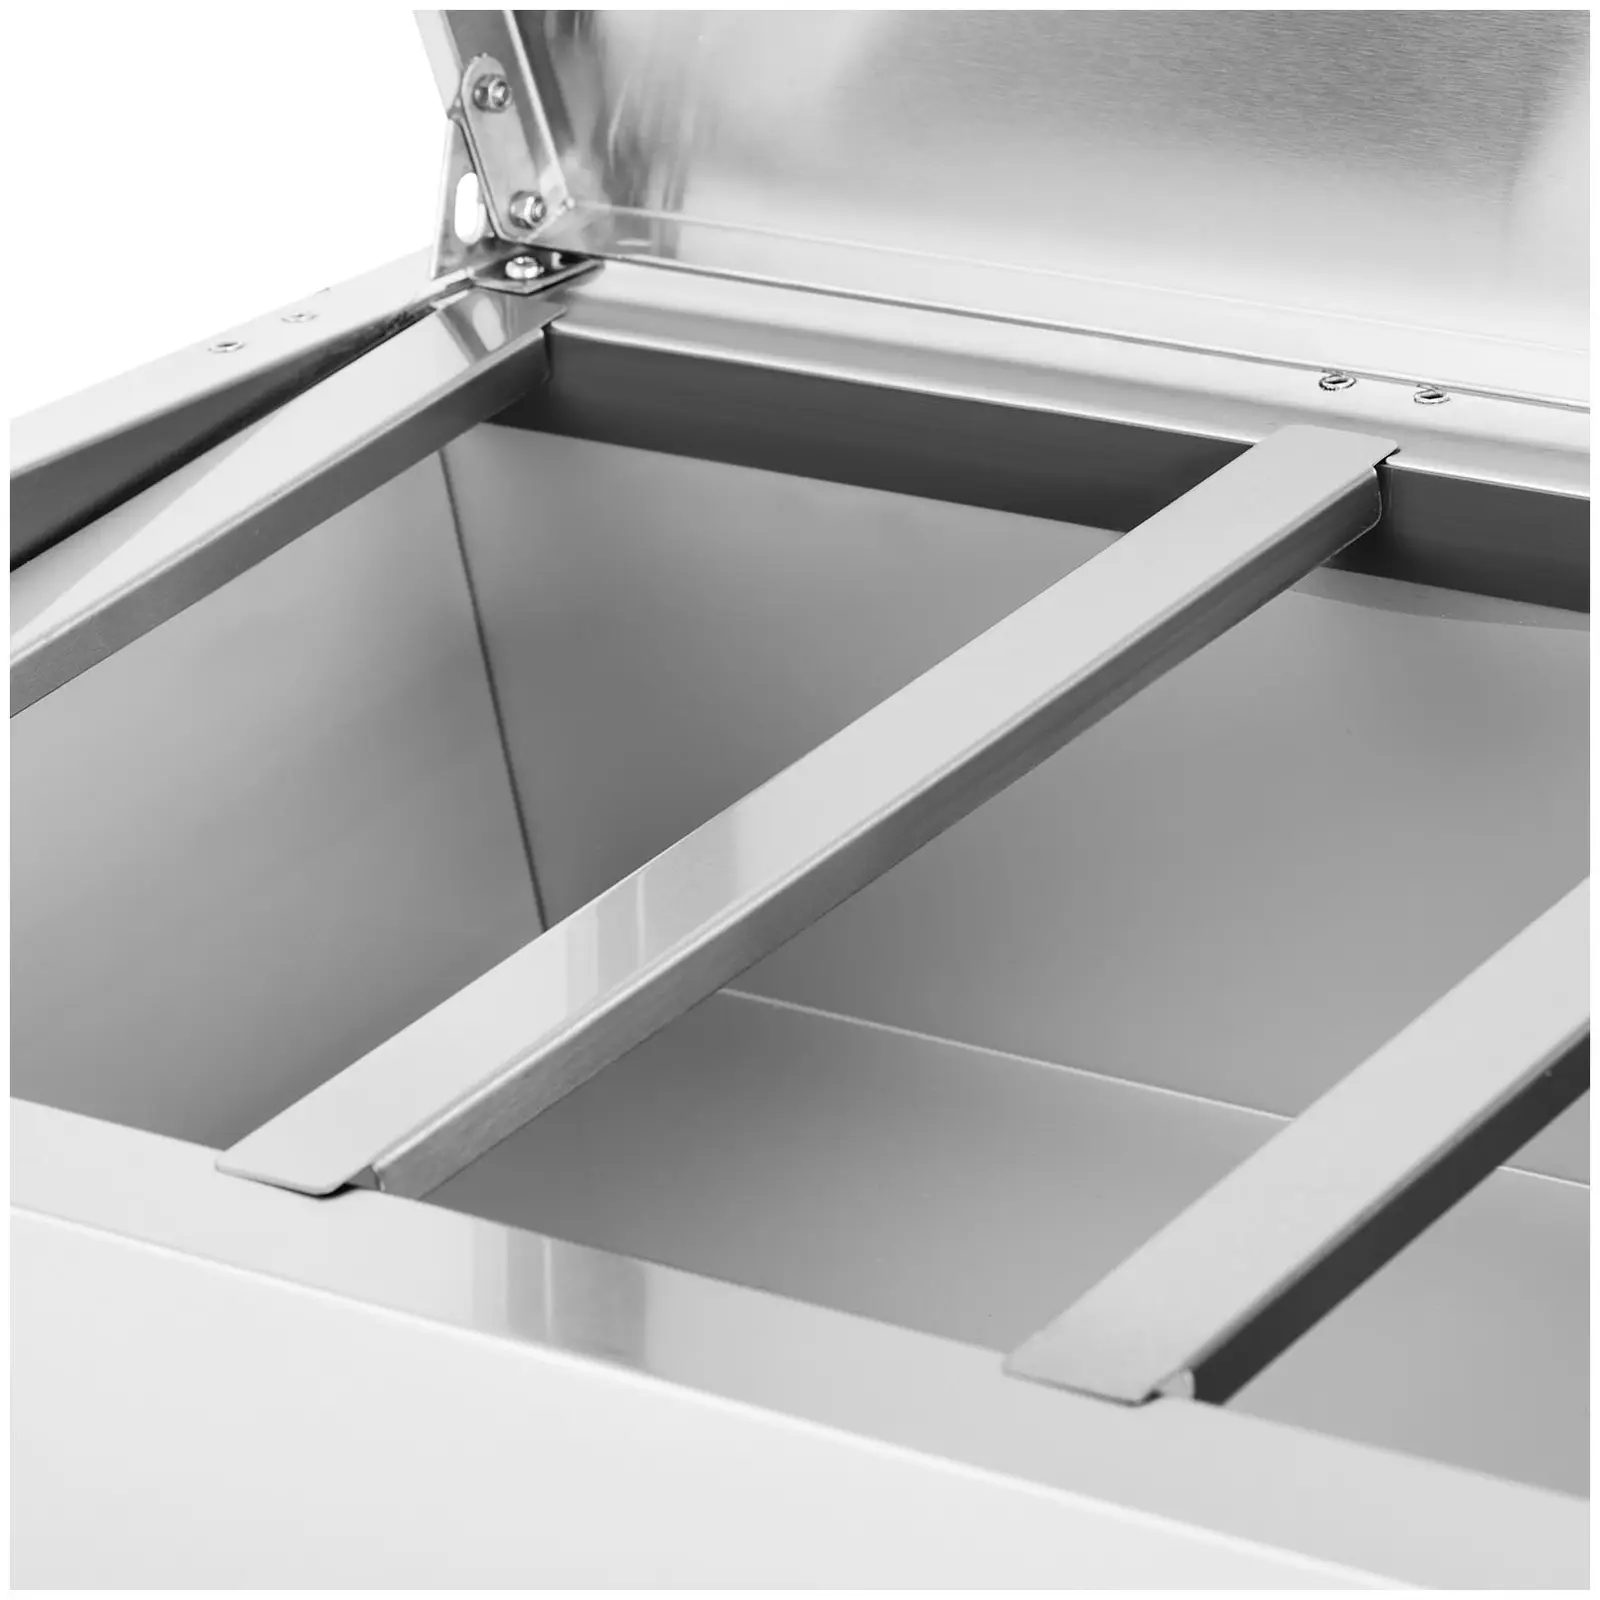 Countertop Refrigerated Display Case - 200 x 33 cm - 10 GN 1/4 Containers